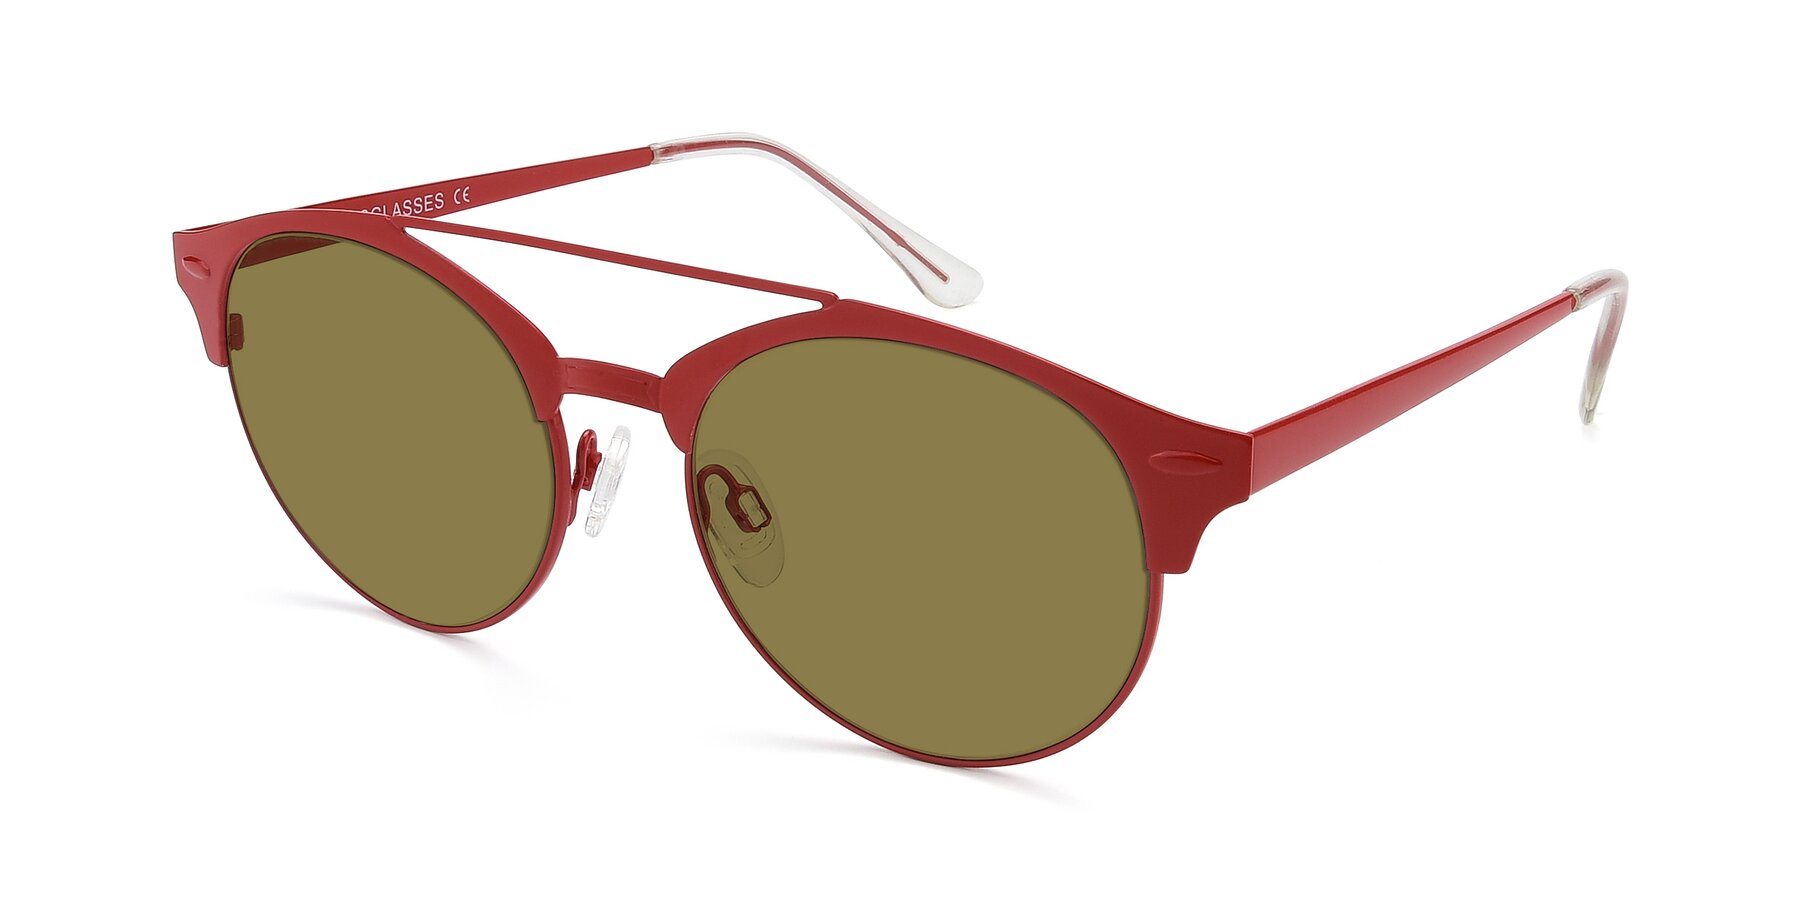 Angle of SSR183 in Red with Brown Polarized Lenses